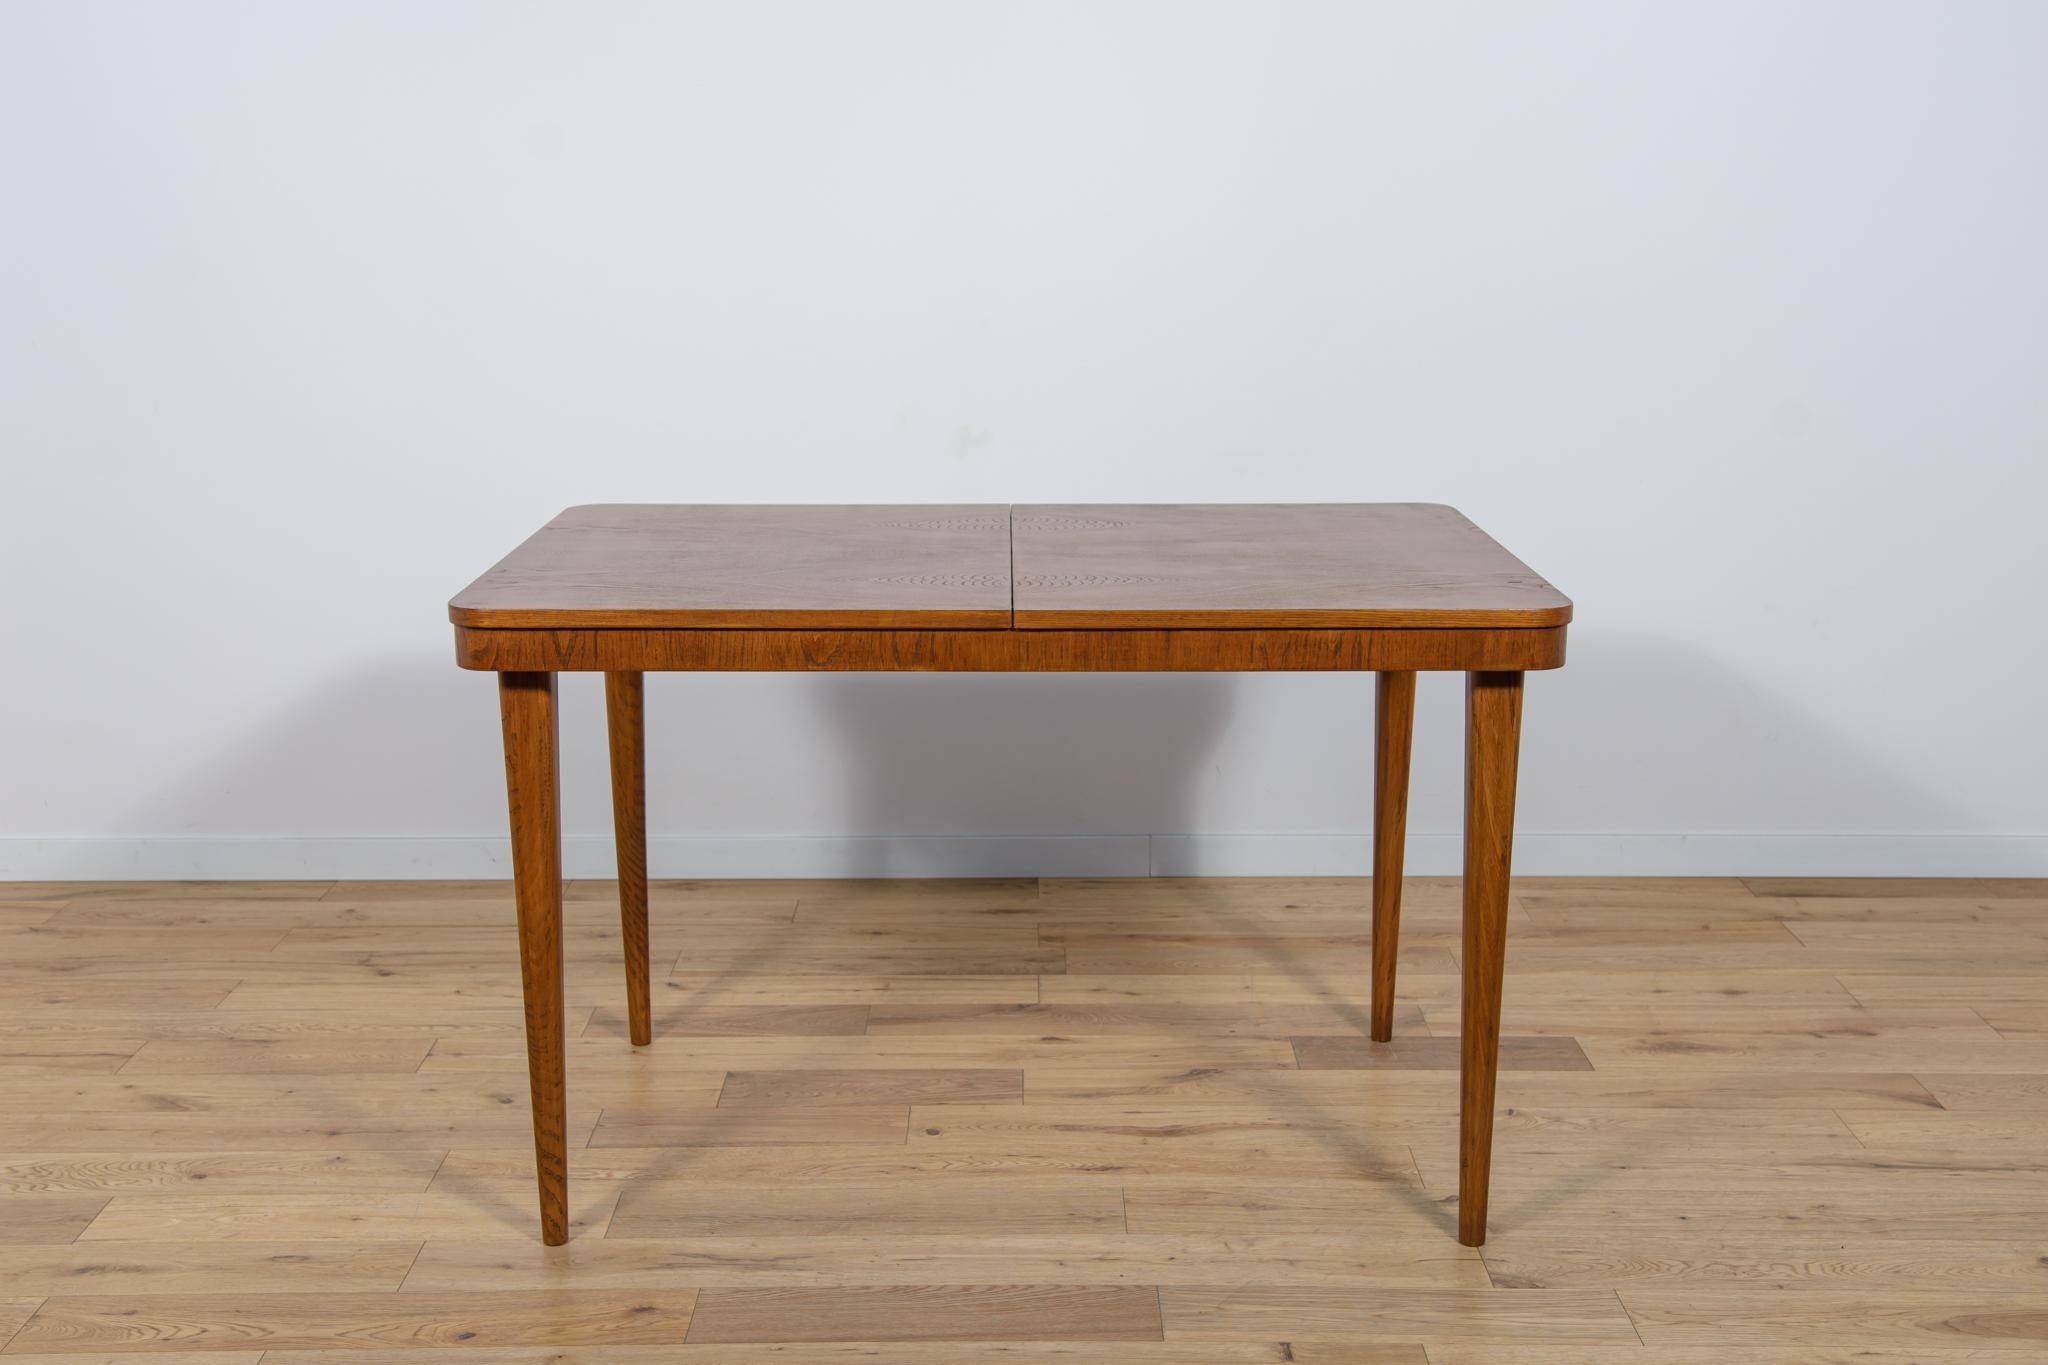 Extendable table manufactured by the furniture factory UP Zavody in Brno. The table is made of beech wood and ash and oak veneer. The table after a comprehensive carpentry renovation, cleaned of the old surface, painted with a oak stain, finished